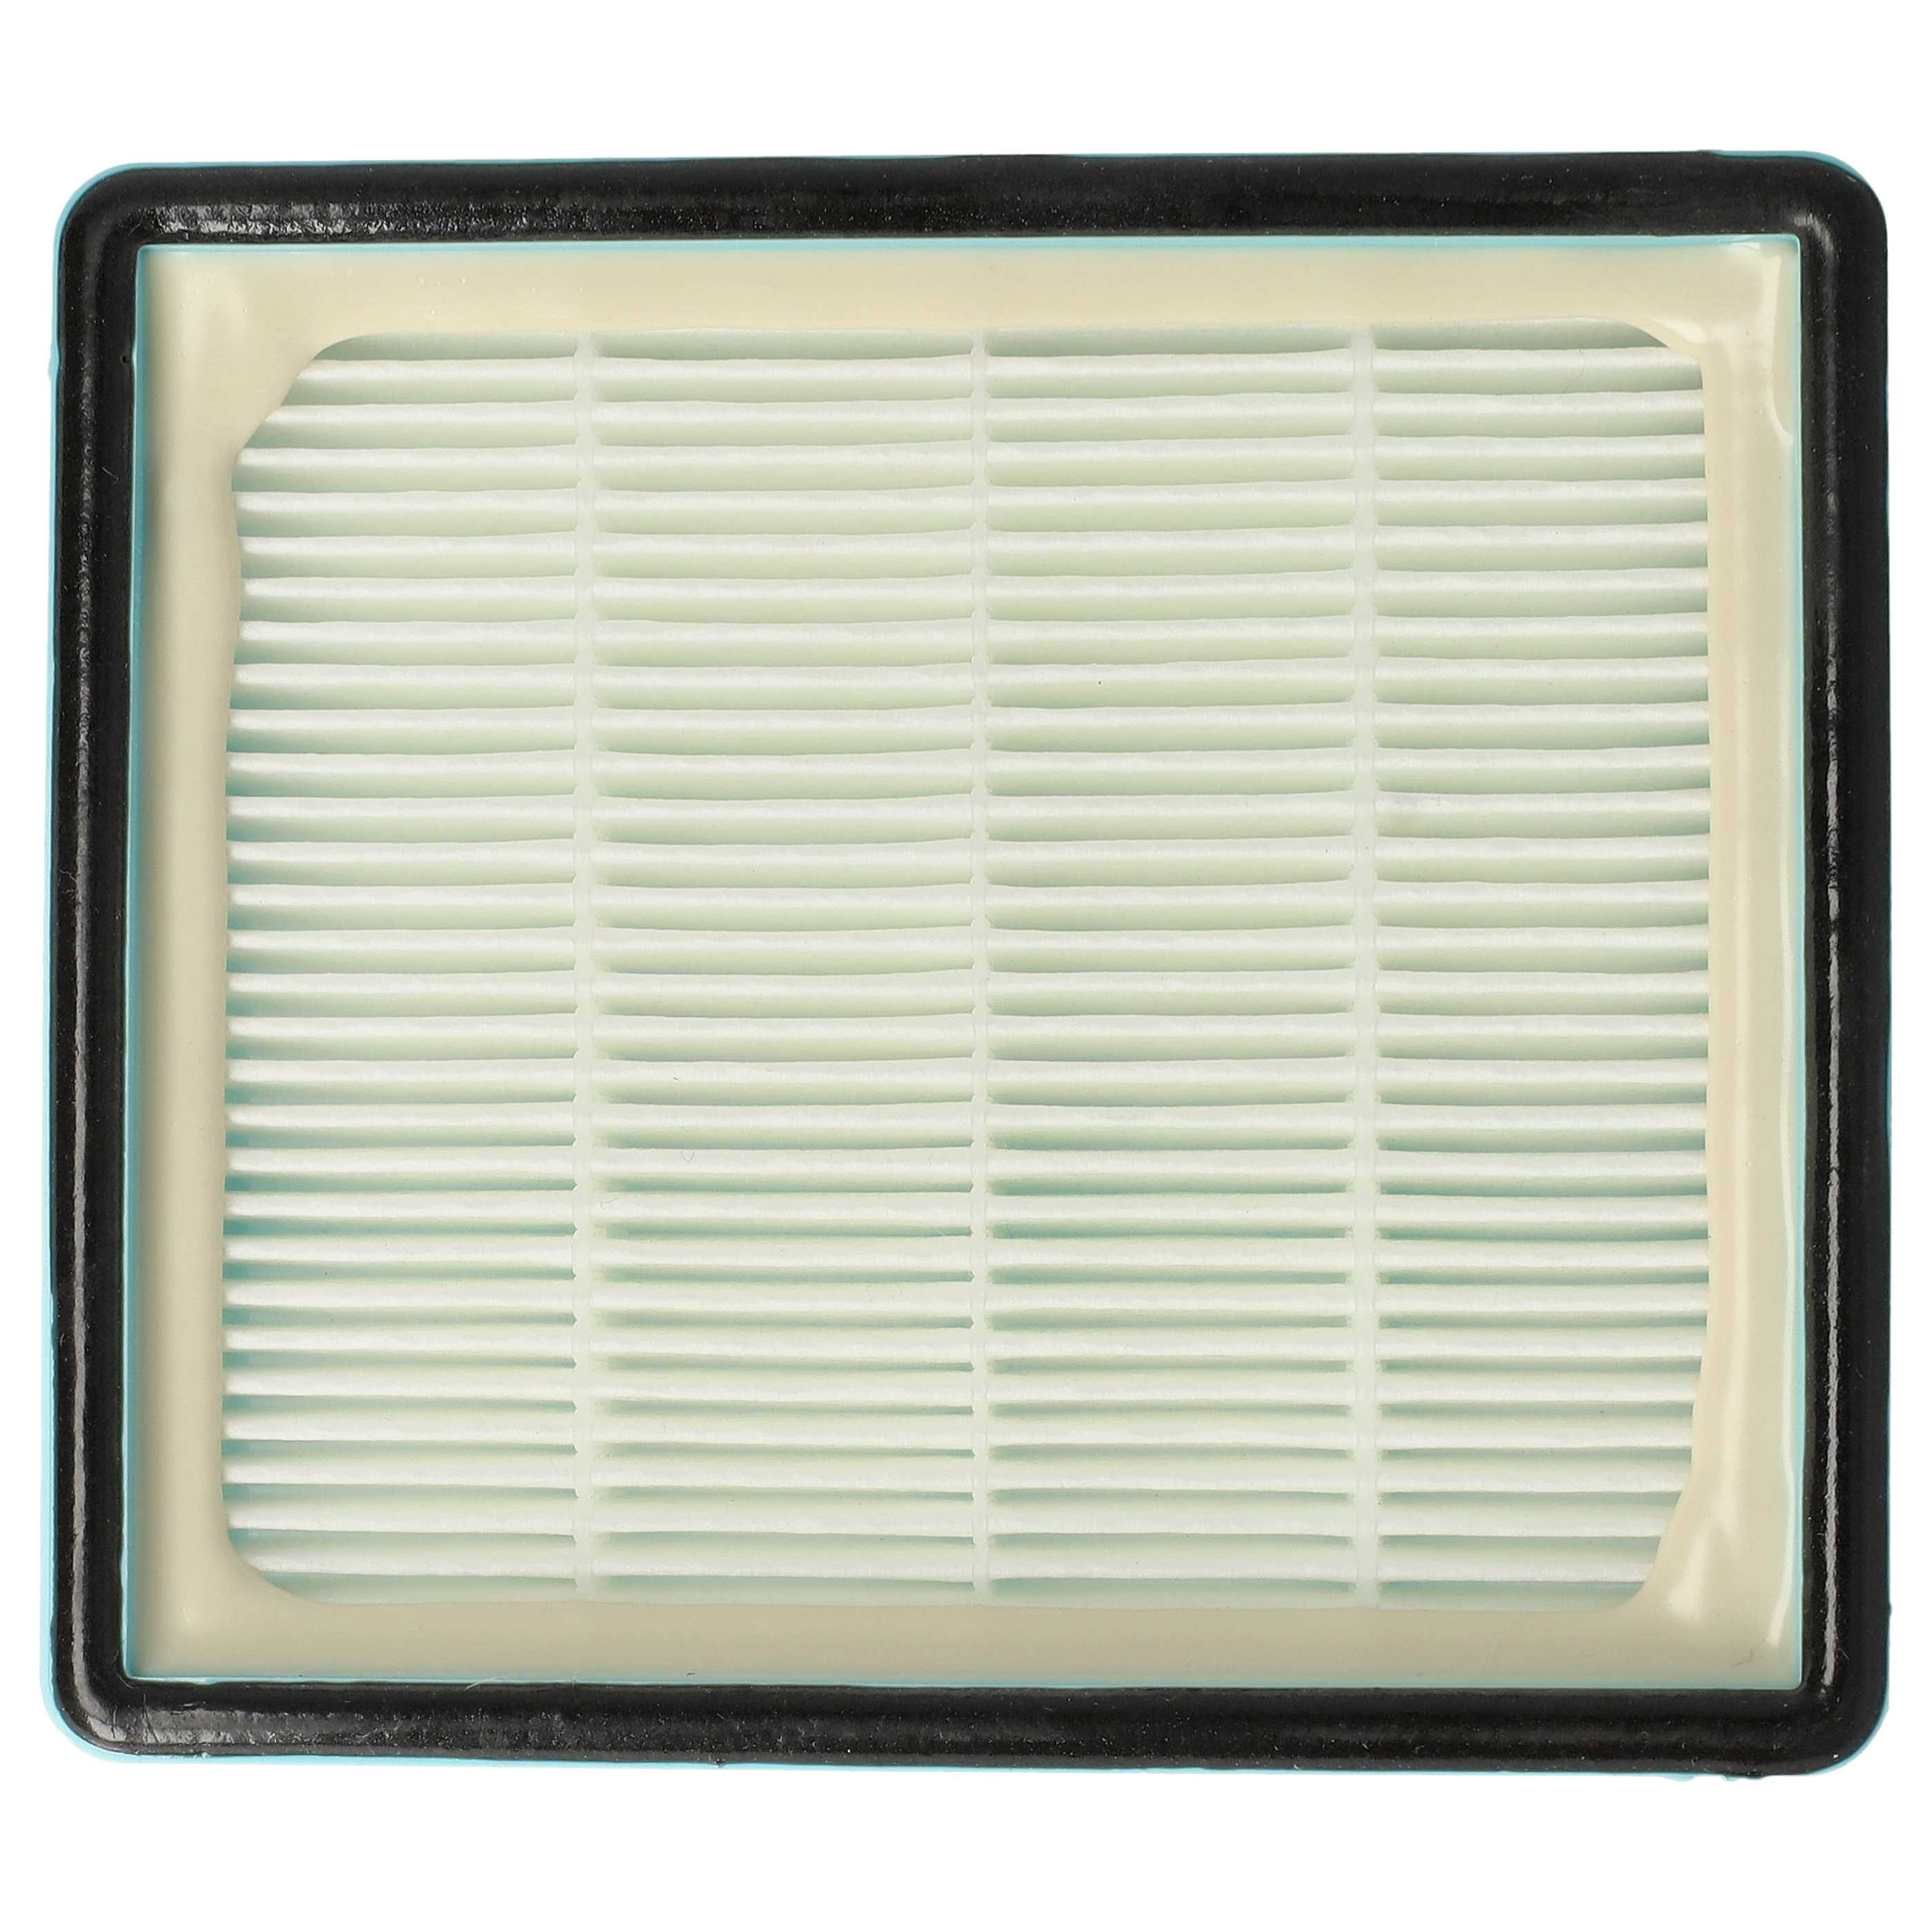 1x HEPA filter replaces Philips CRP495, CP0259/01, 432200493941 for Philips Vacuum Cleaner